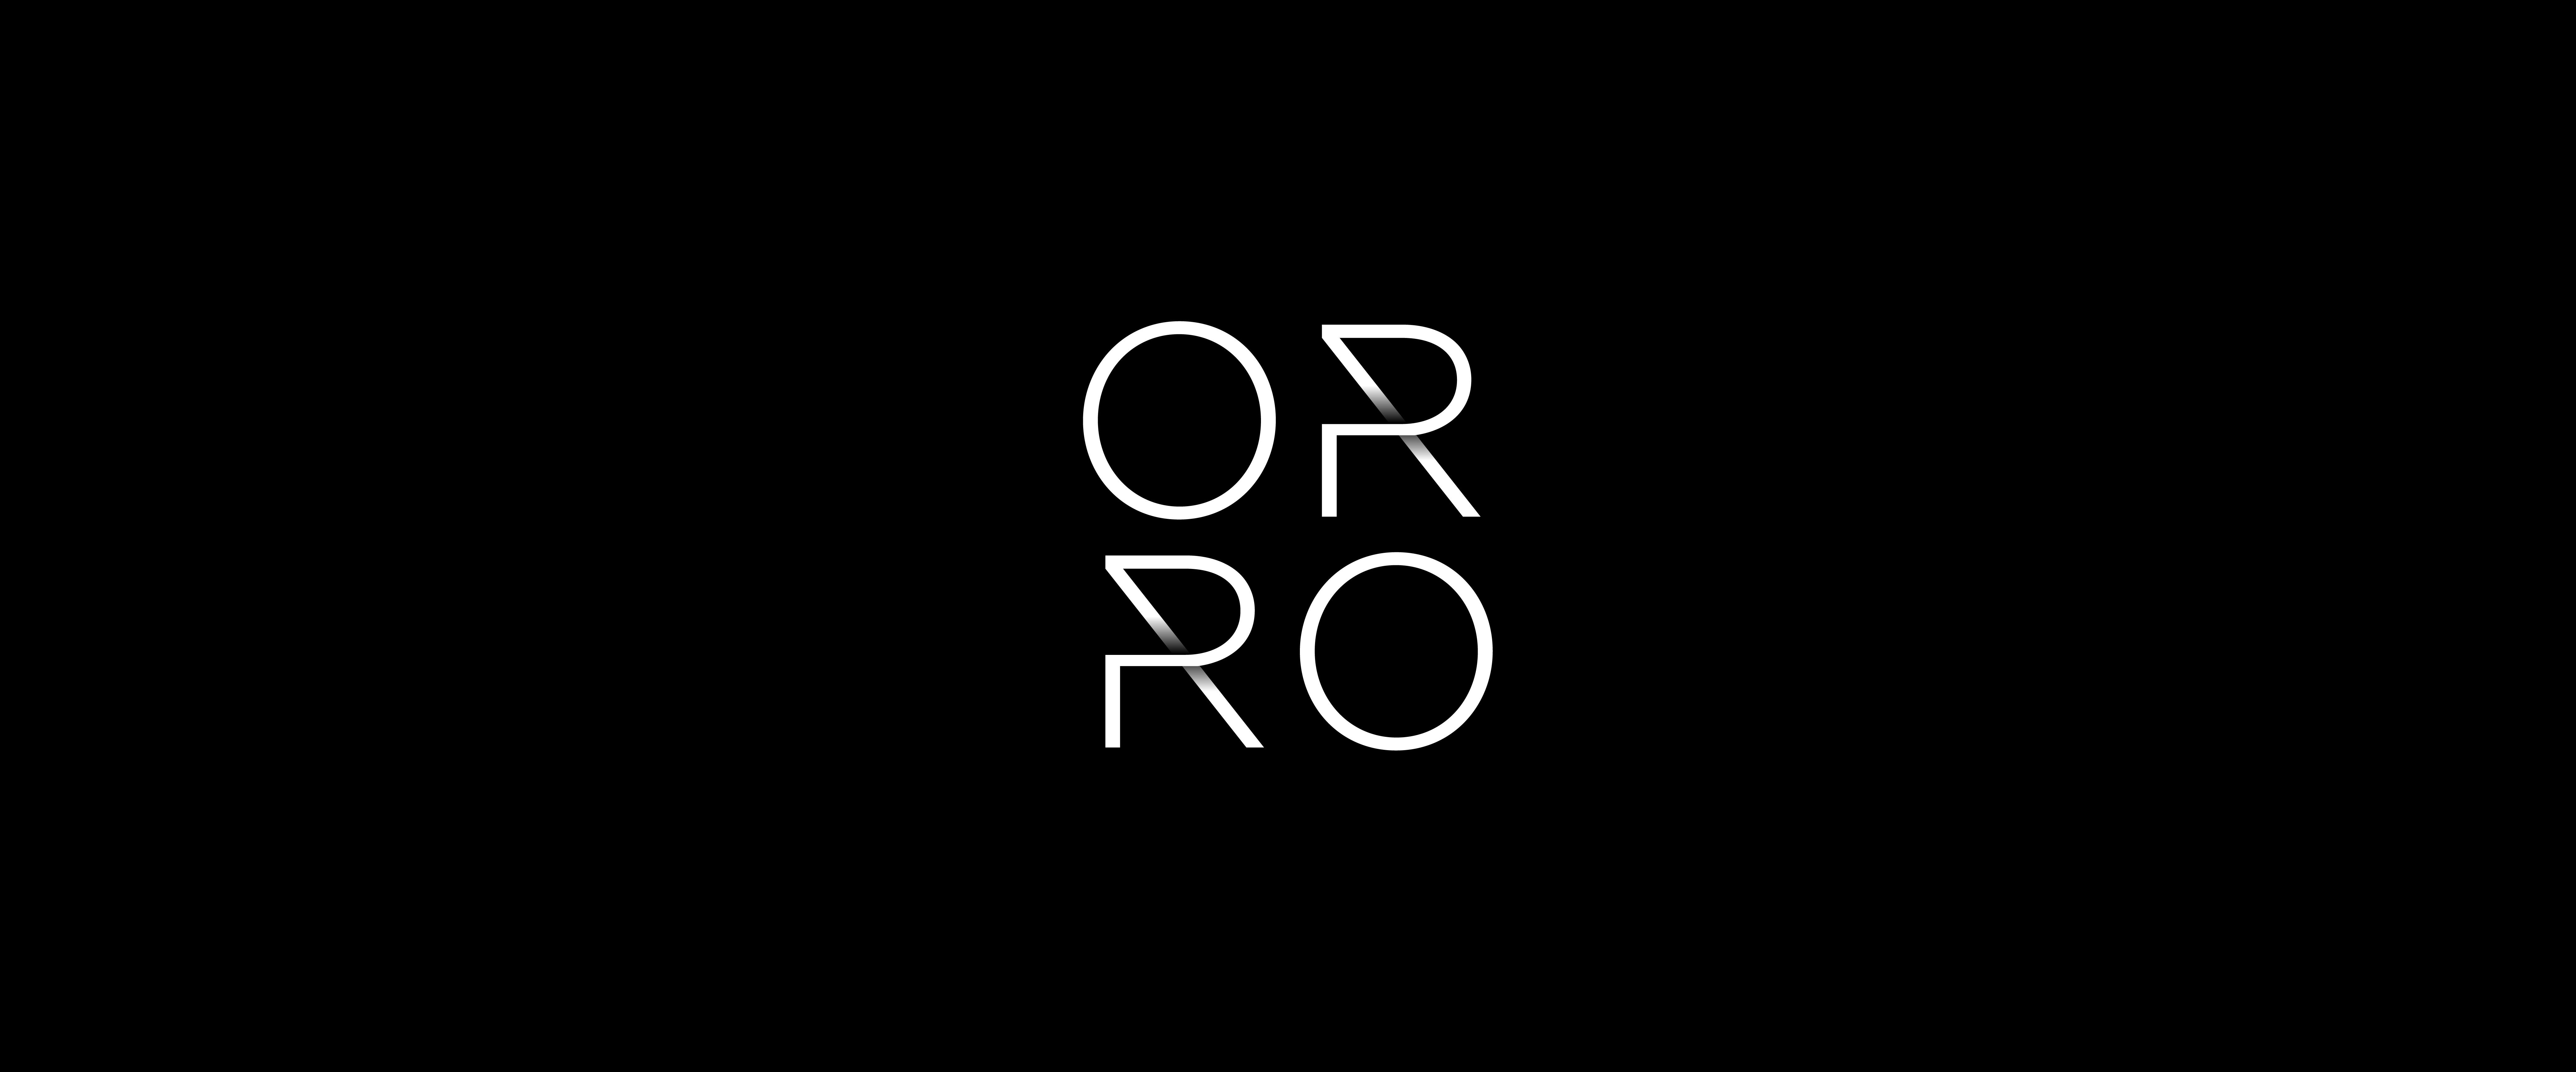 New Logo, Identity, and Packaging for Orro by Enlisted Design